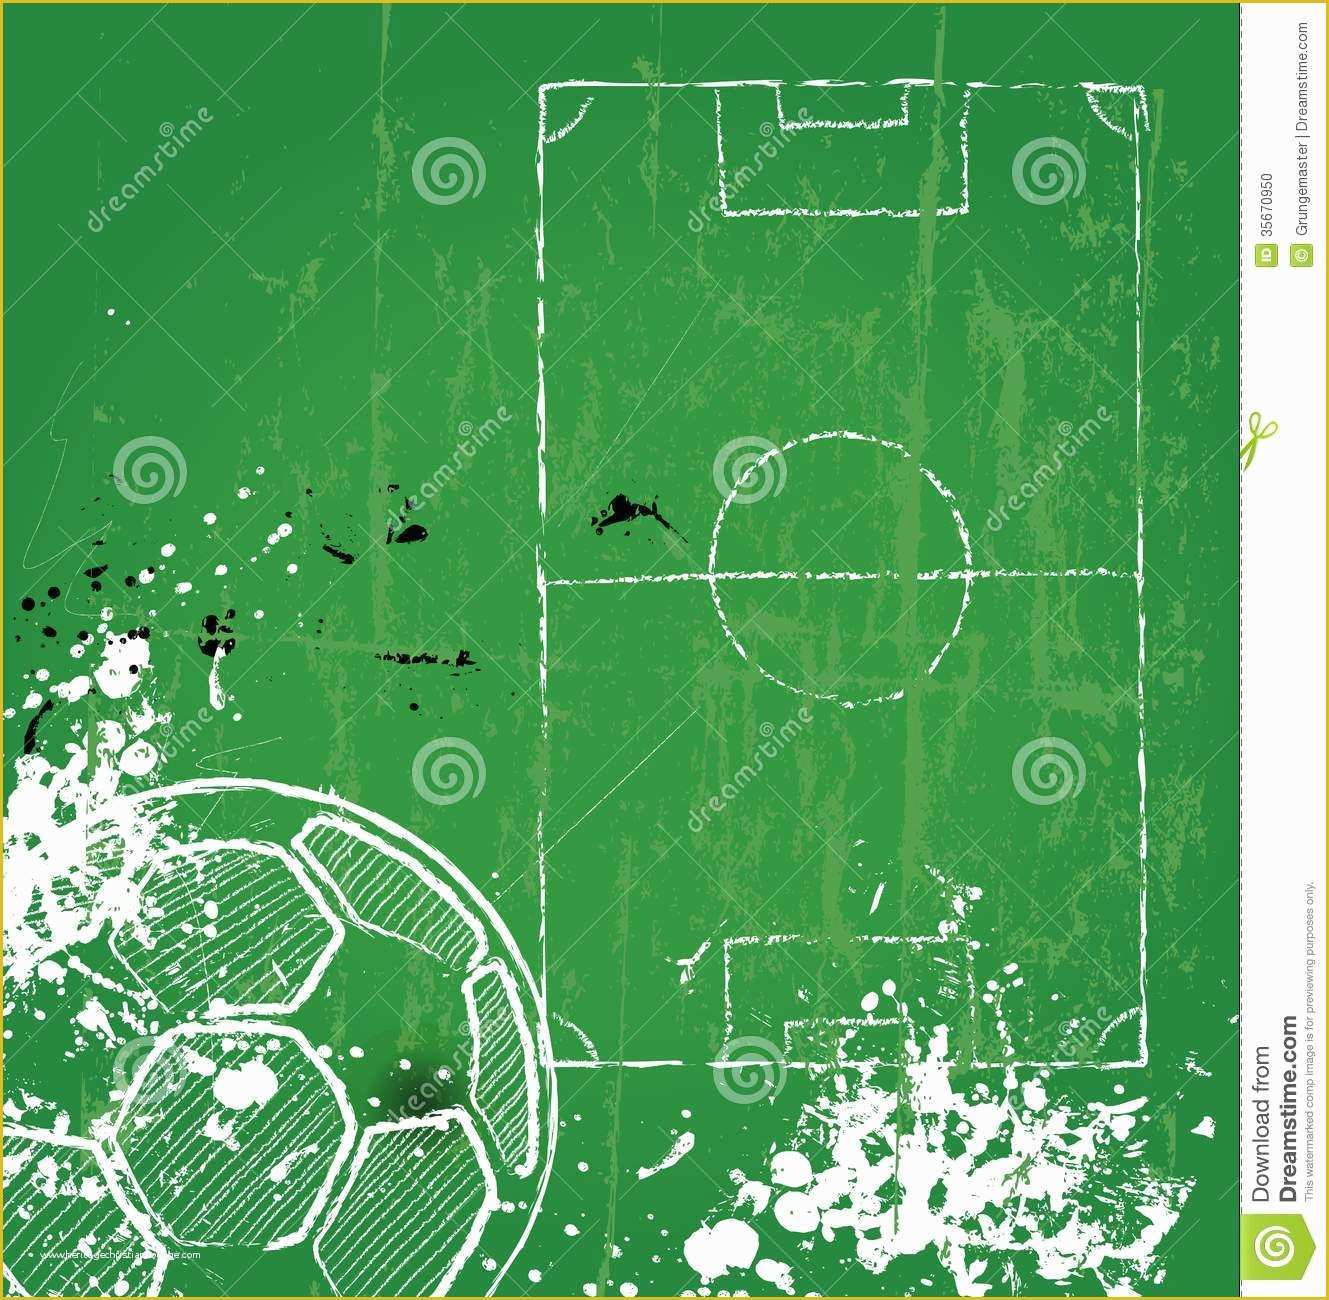 Free soccer Team Photo Templates Of soccer Football Stock Image